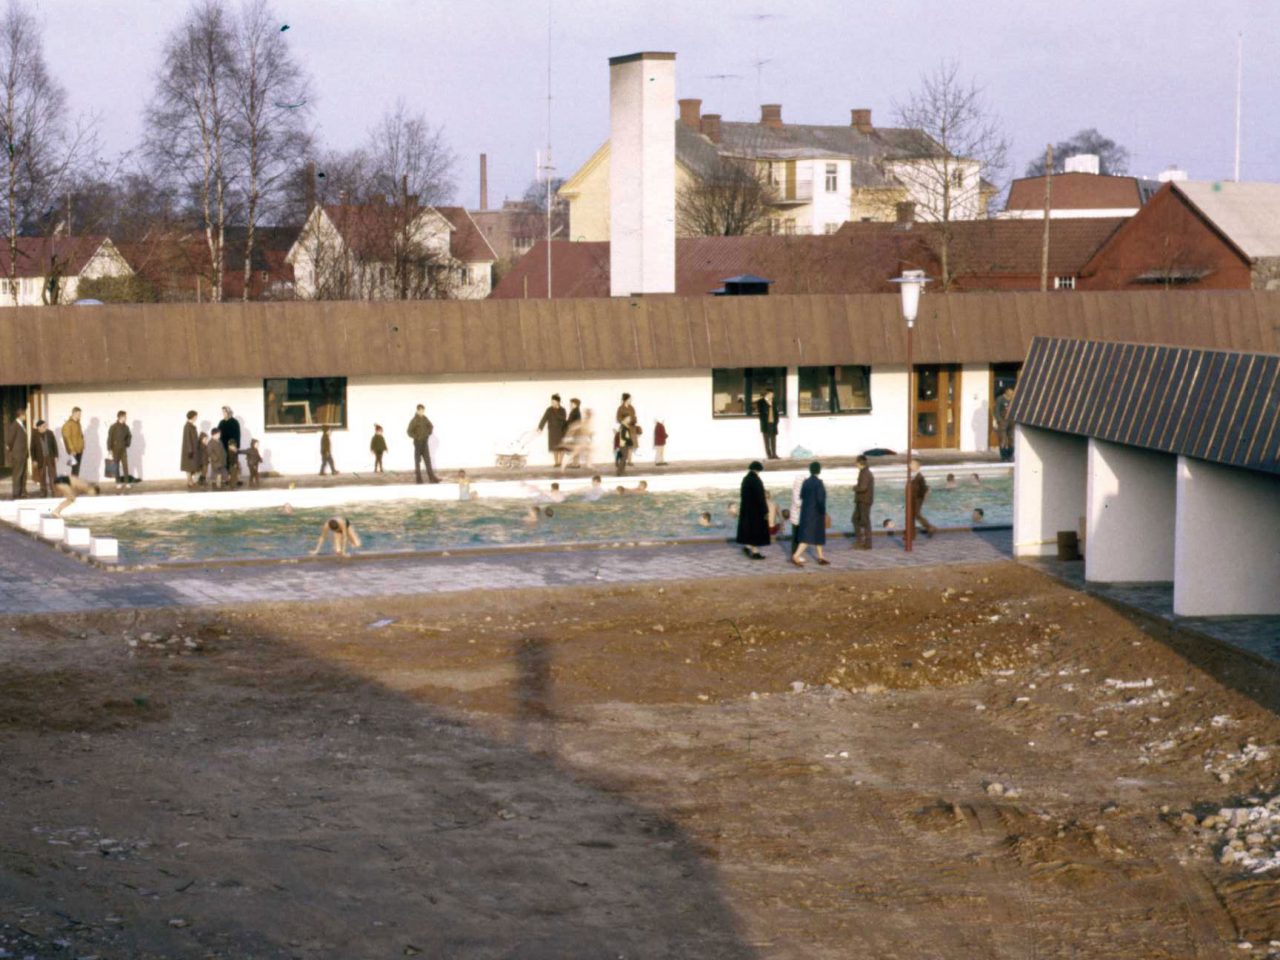 Warmly dressed visitors walk around a motel building and pool in autumn-like weather.